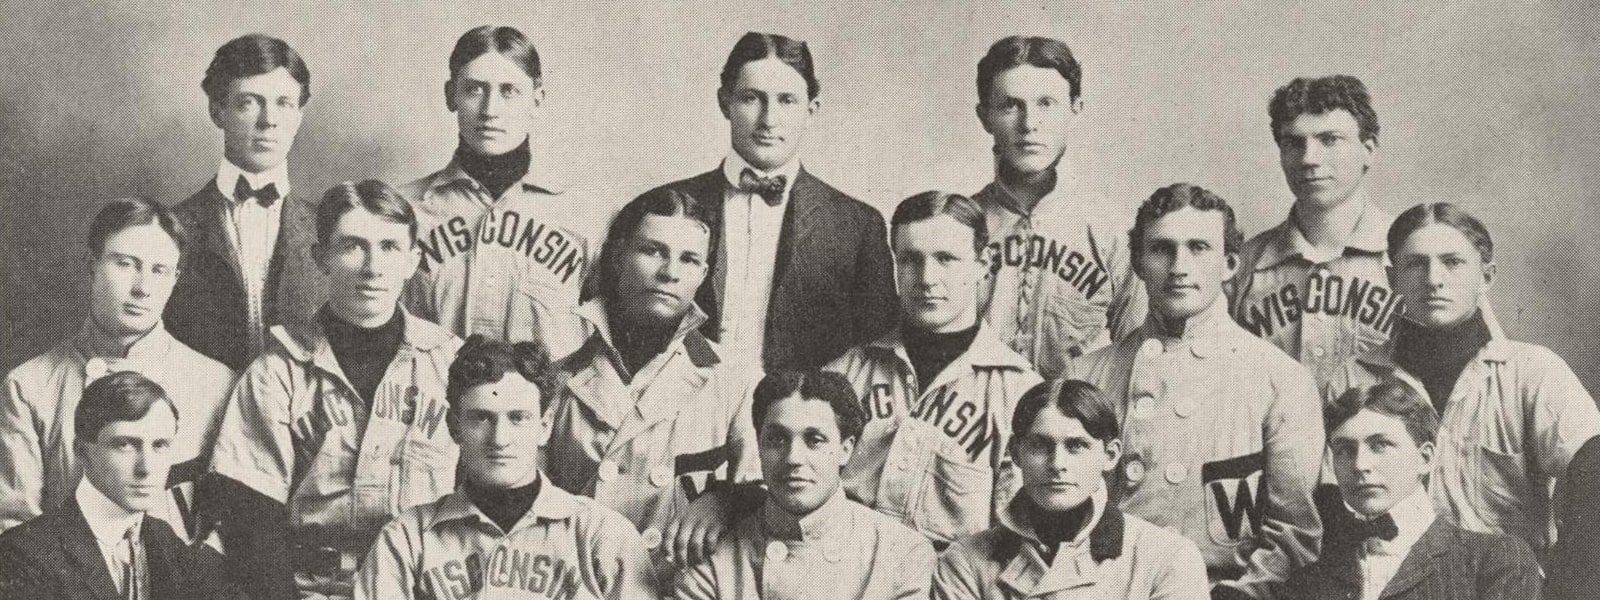 Members of the (men’s) varsity baseball team photo from 1902 as pictured in the 1904 Badger yearbook.